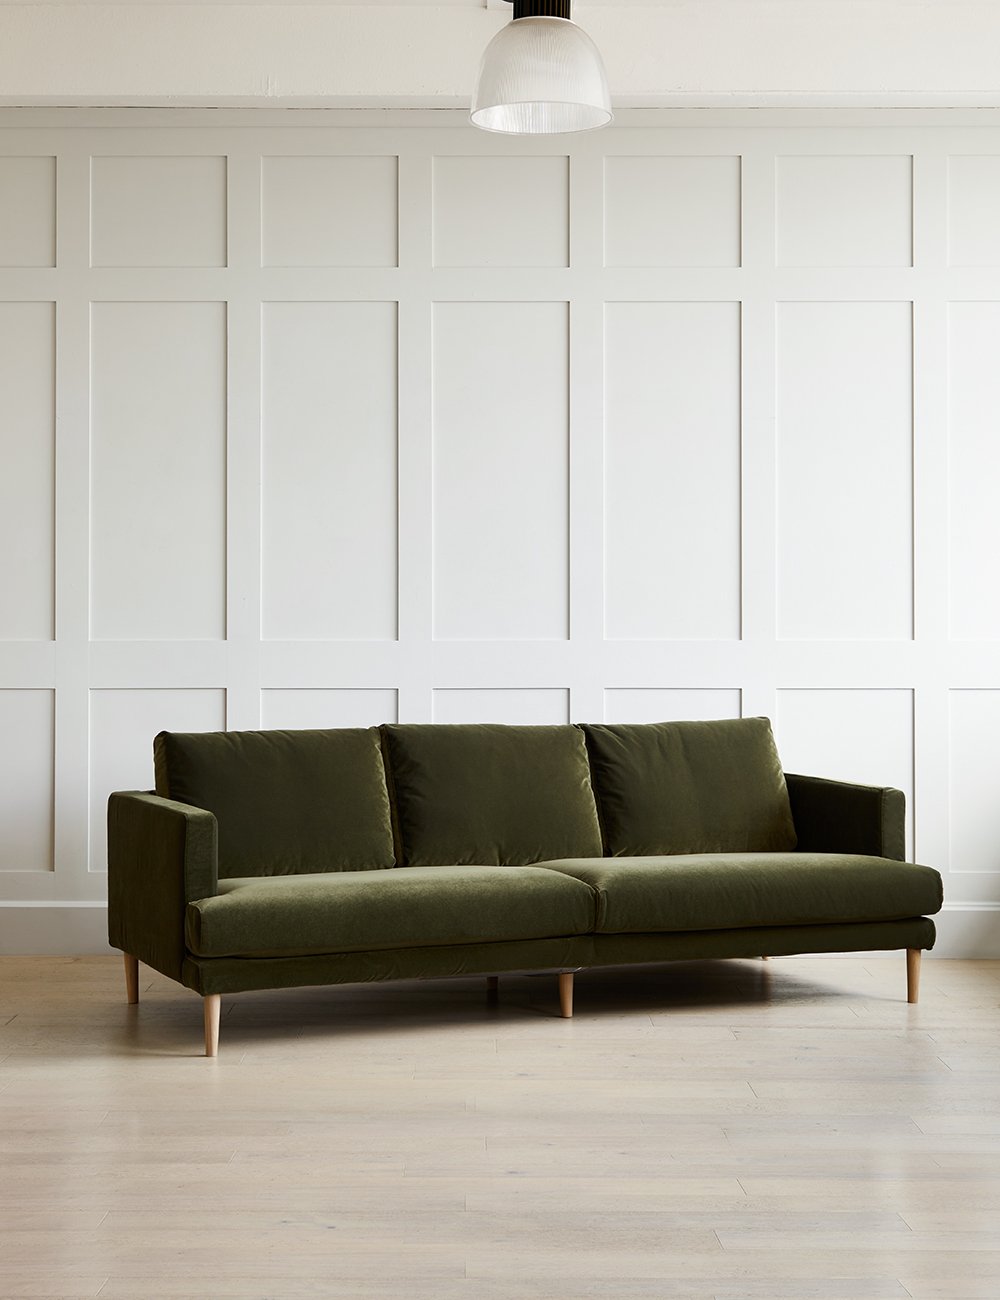 Wetherby Sofa 4 Seater